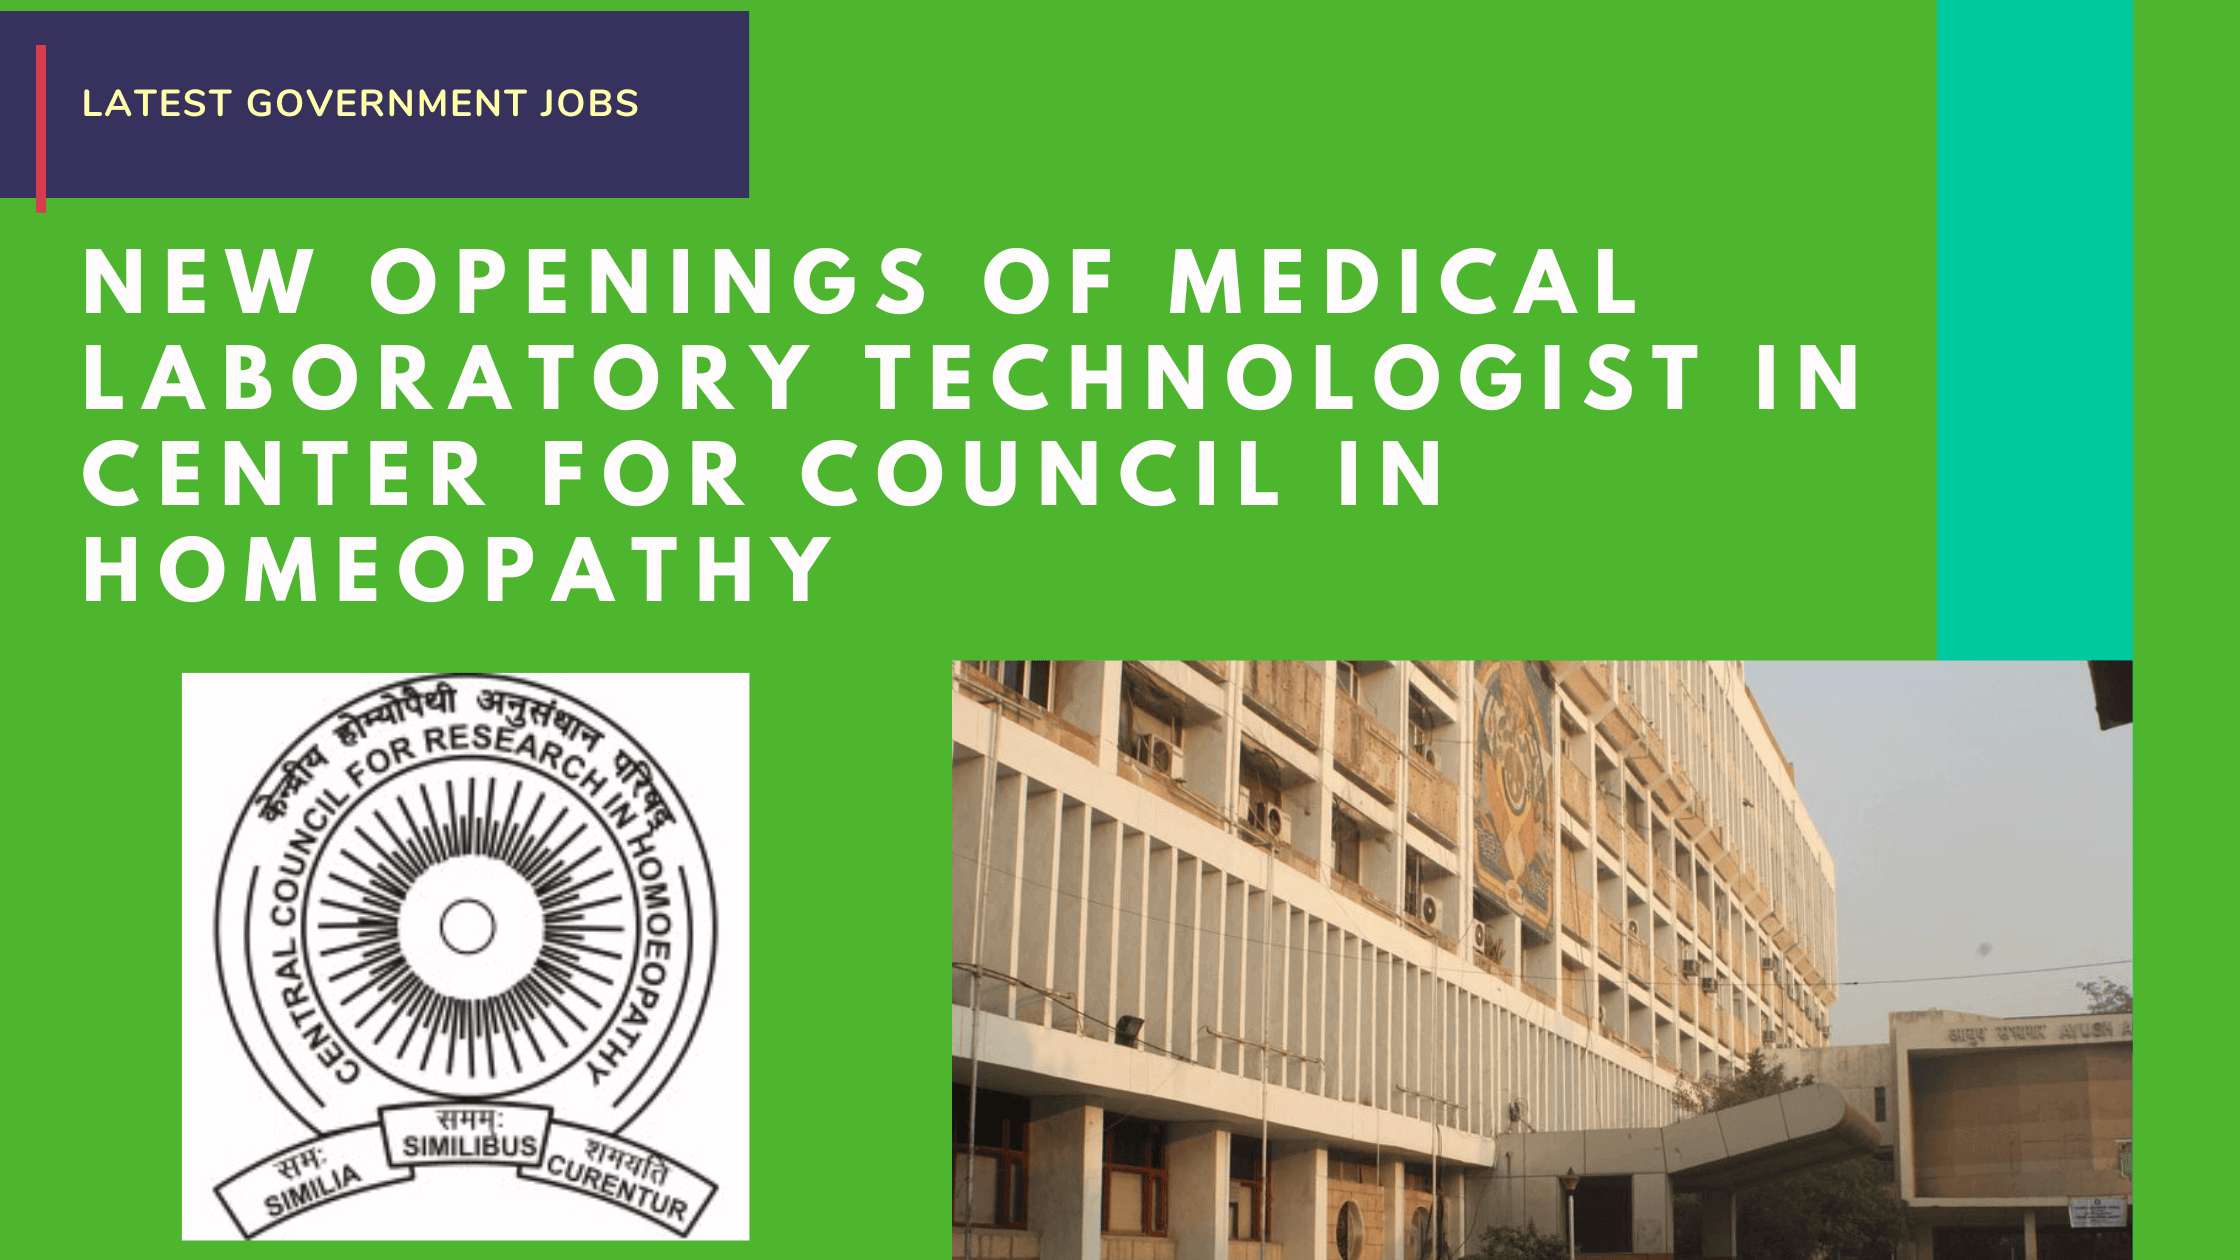 New openings of Medical Laboratory Technologist in Center for Council in Homeopathy latest government jobs